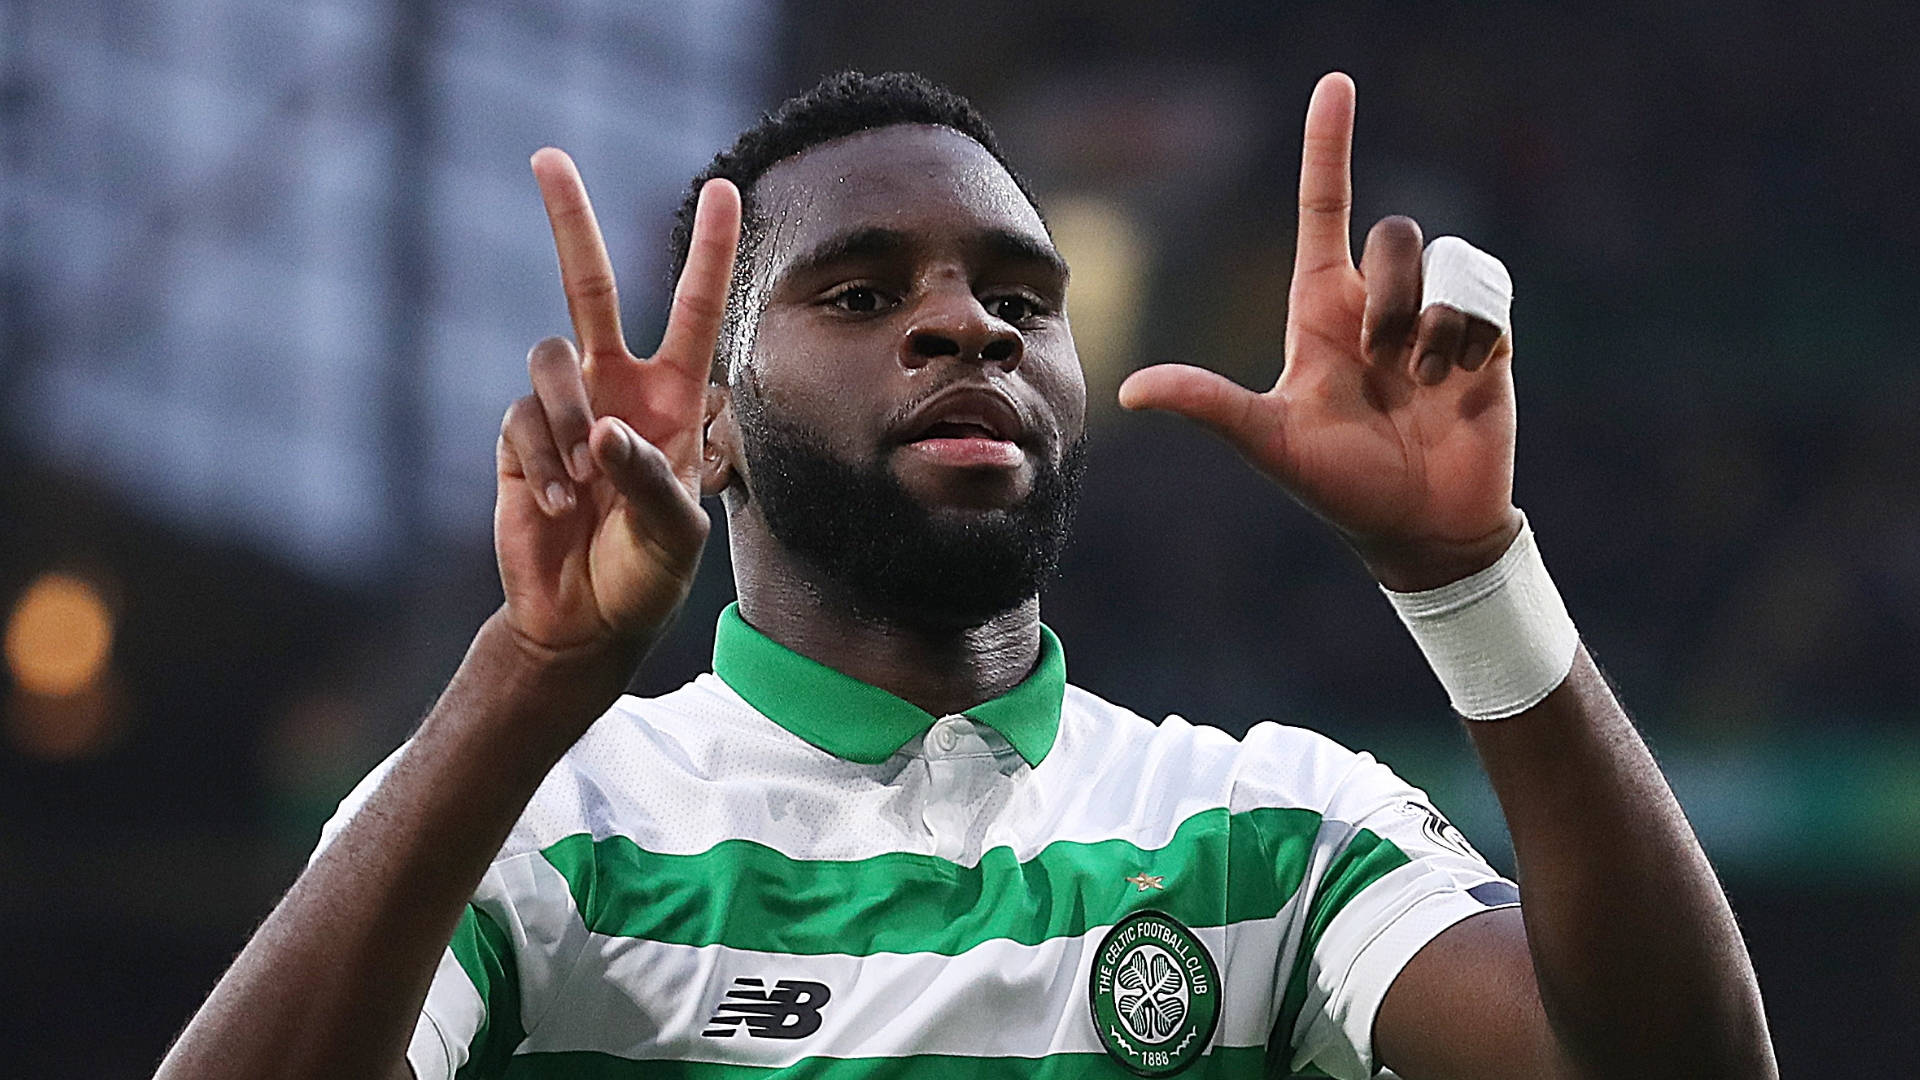 Odsonne Edouard 2 And L Gesture Wallpaper